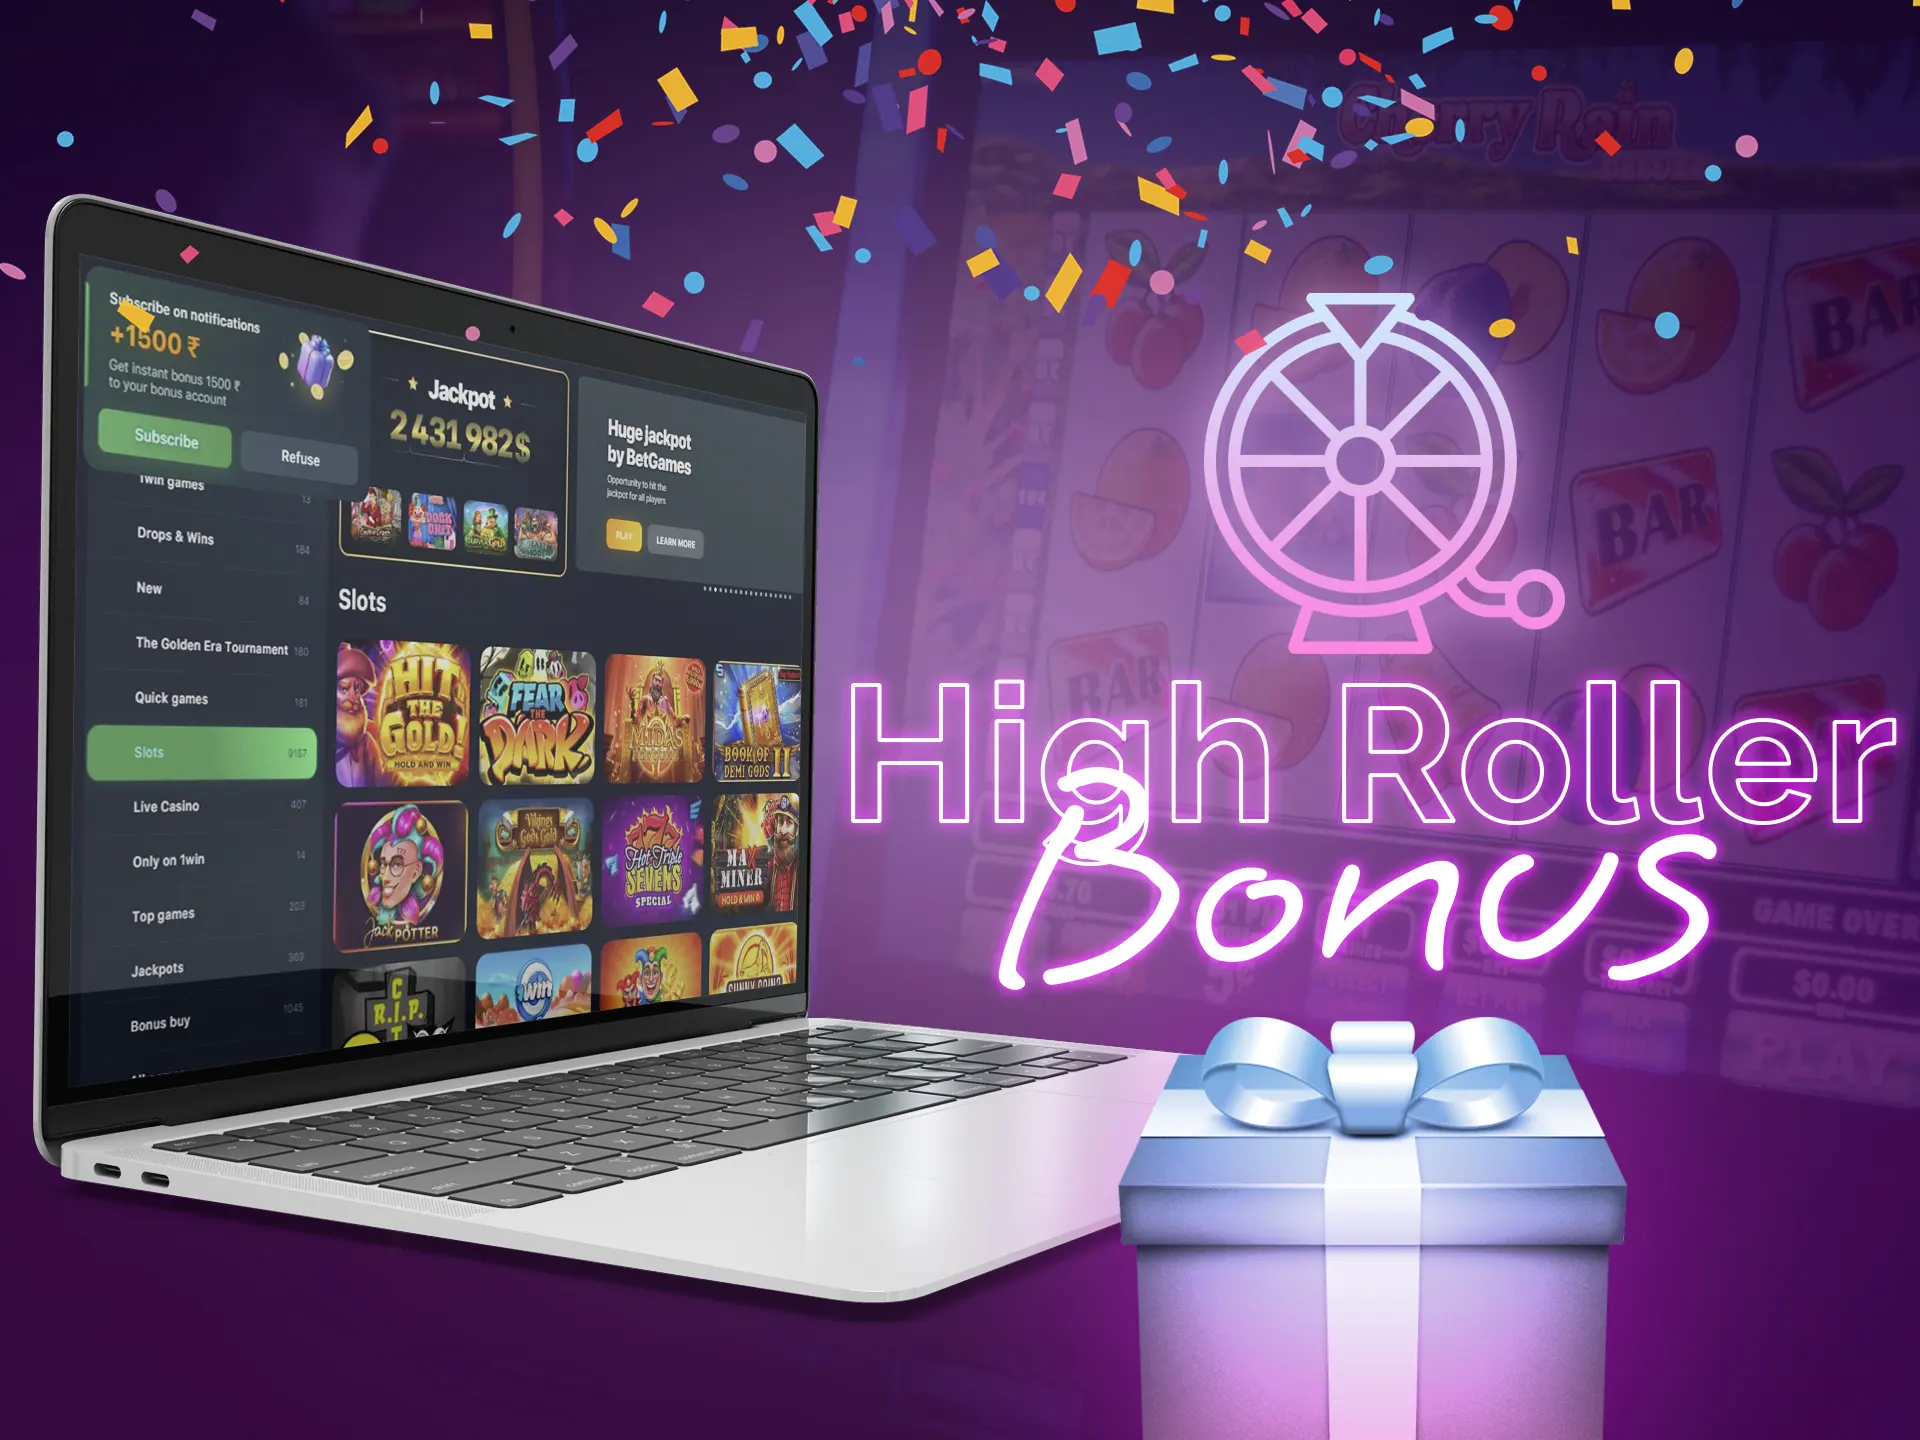 A high roller bonus promotion is a special program for players that made huge deposits to a casino.